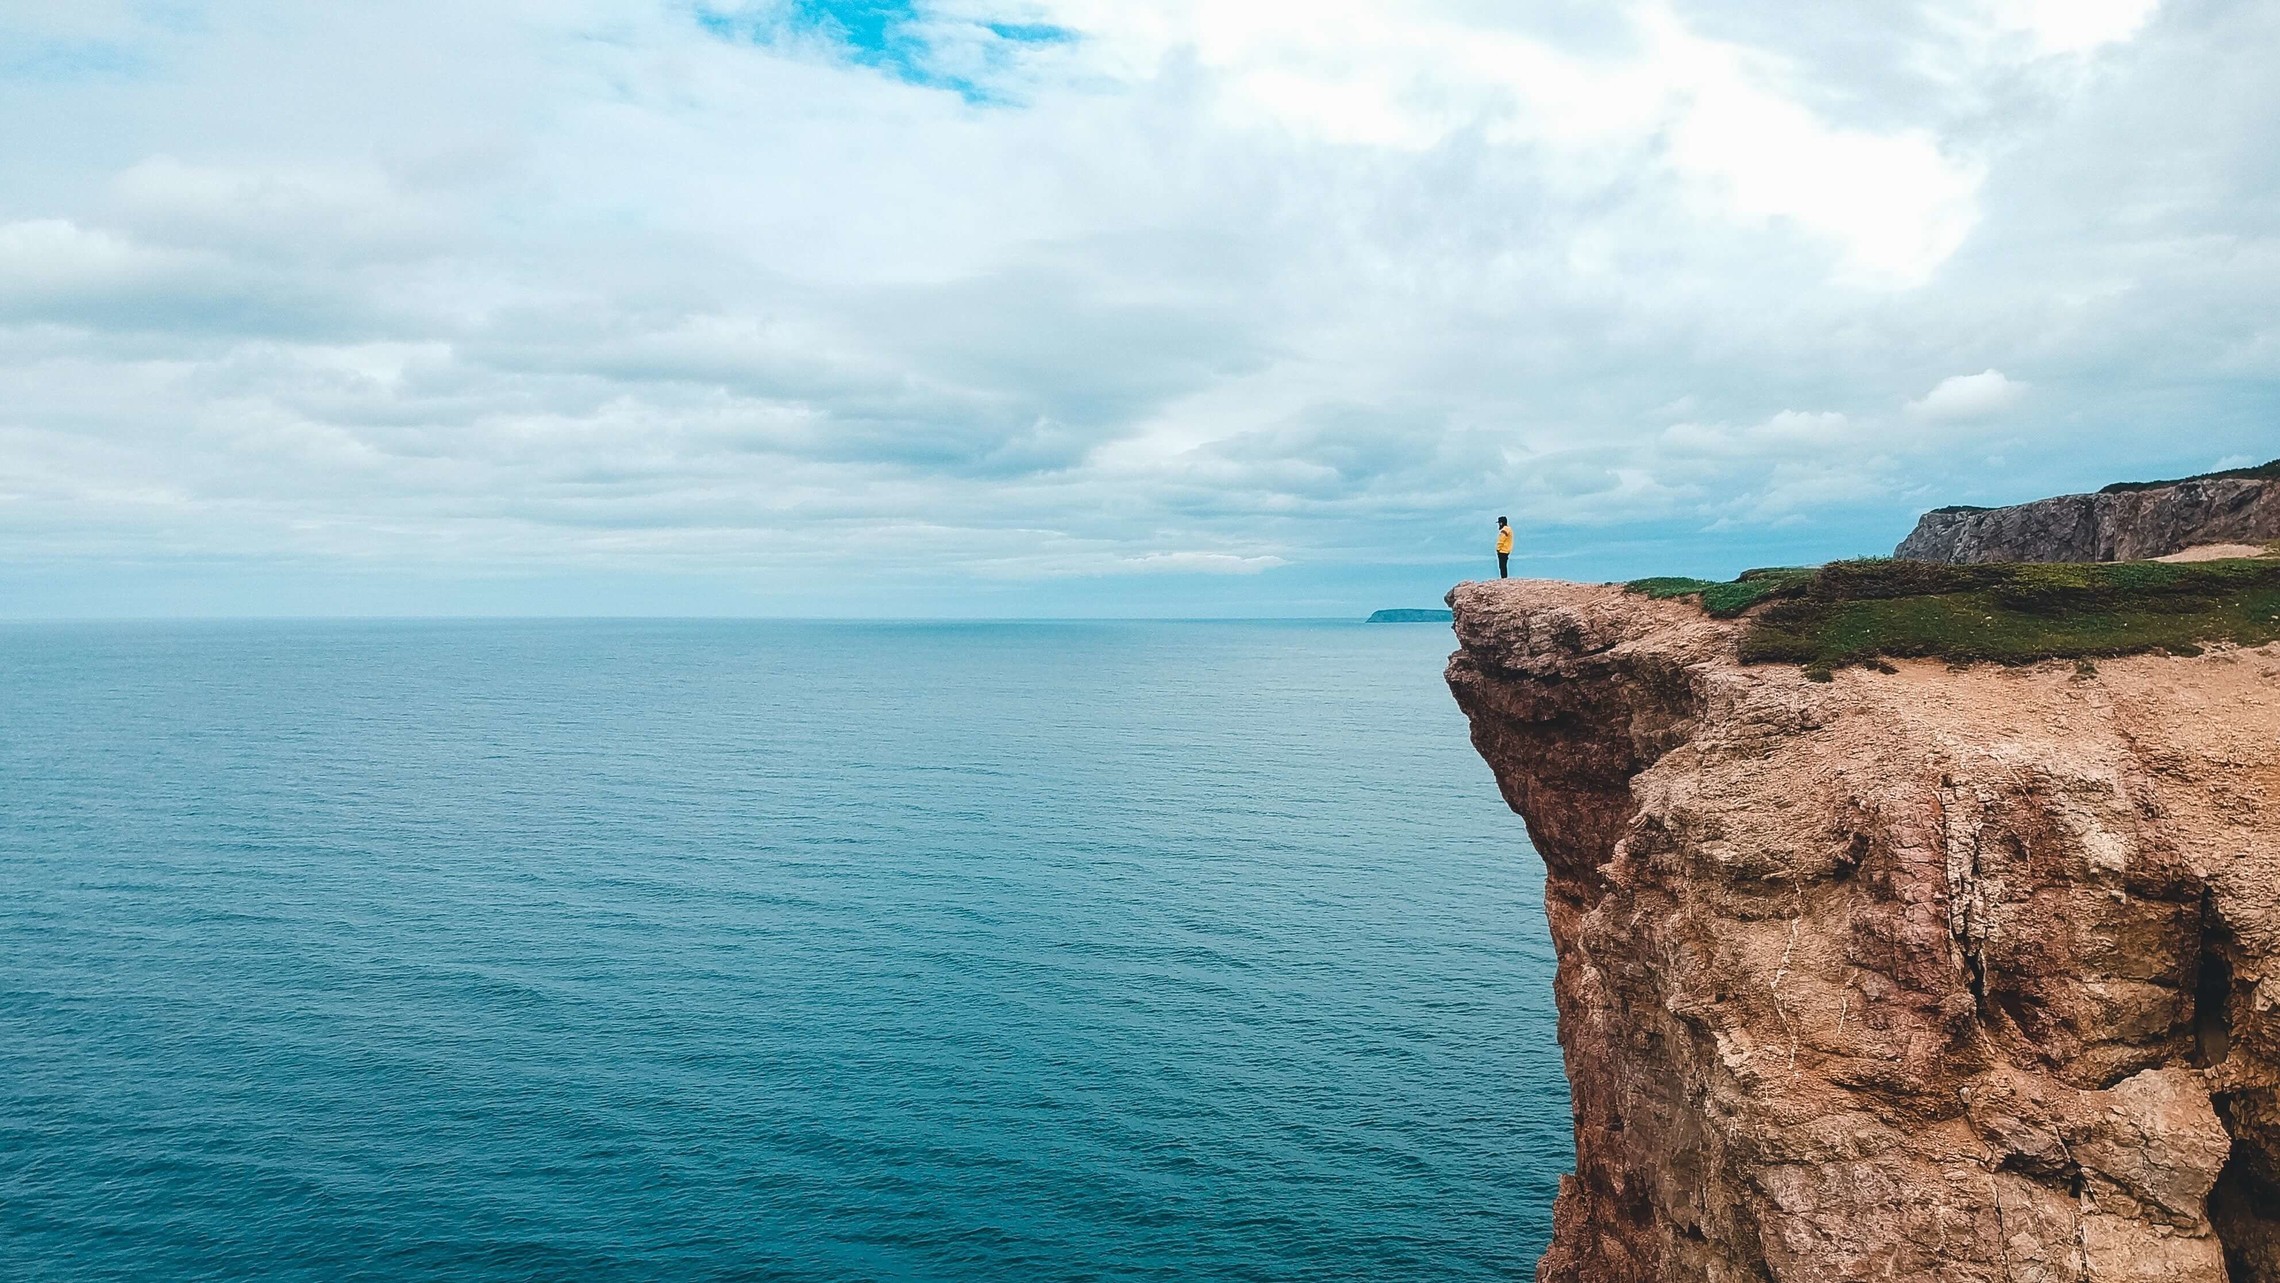 landscape photo of a rockface cliff overlooking the ocean with a solitary person at the edge